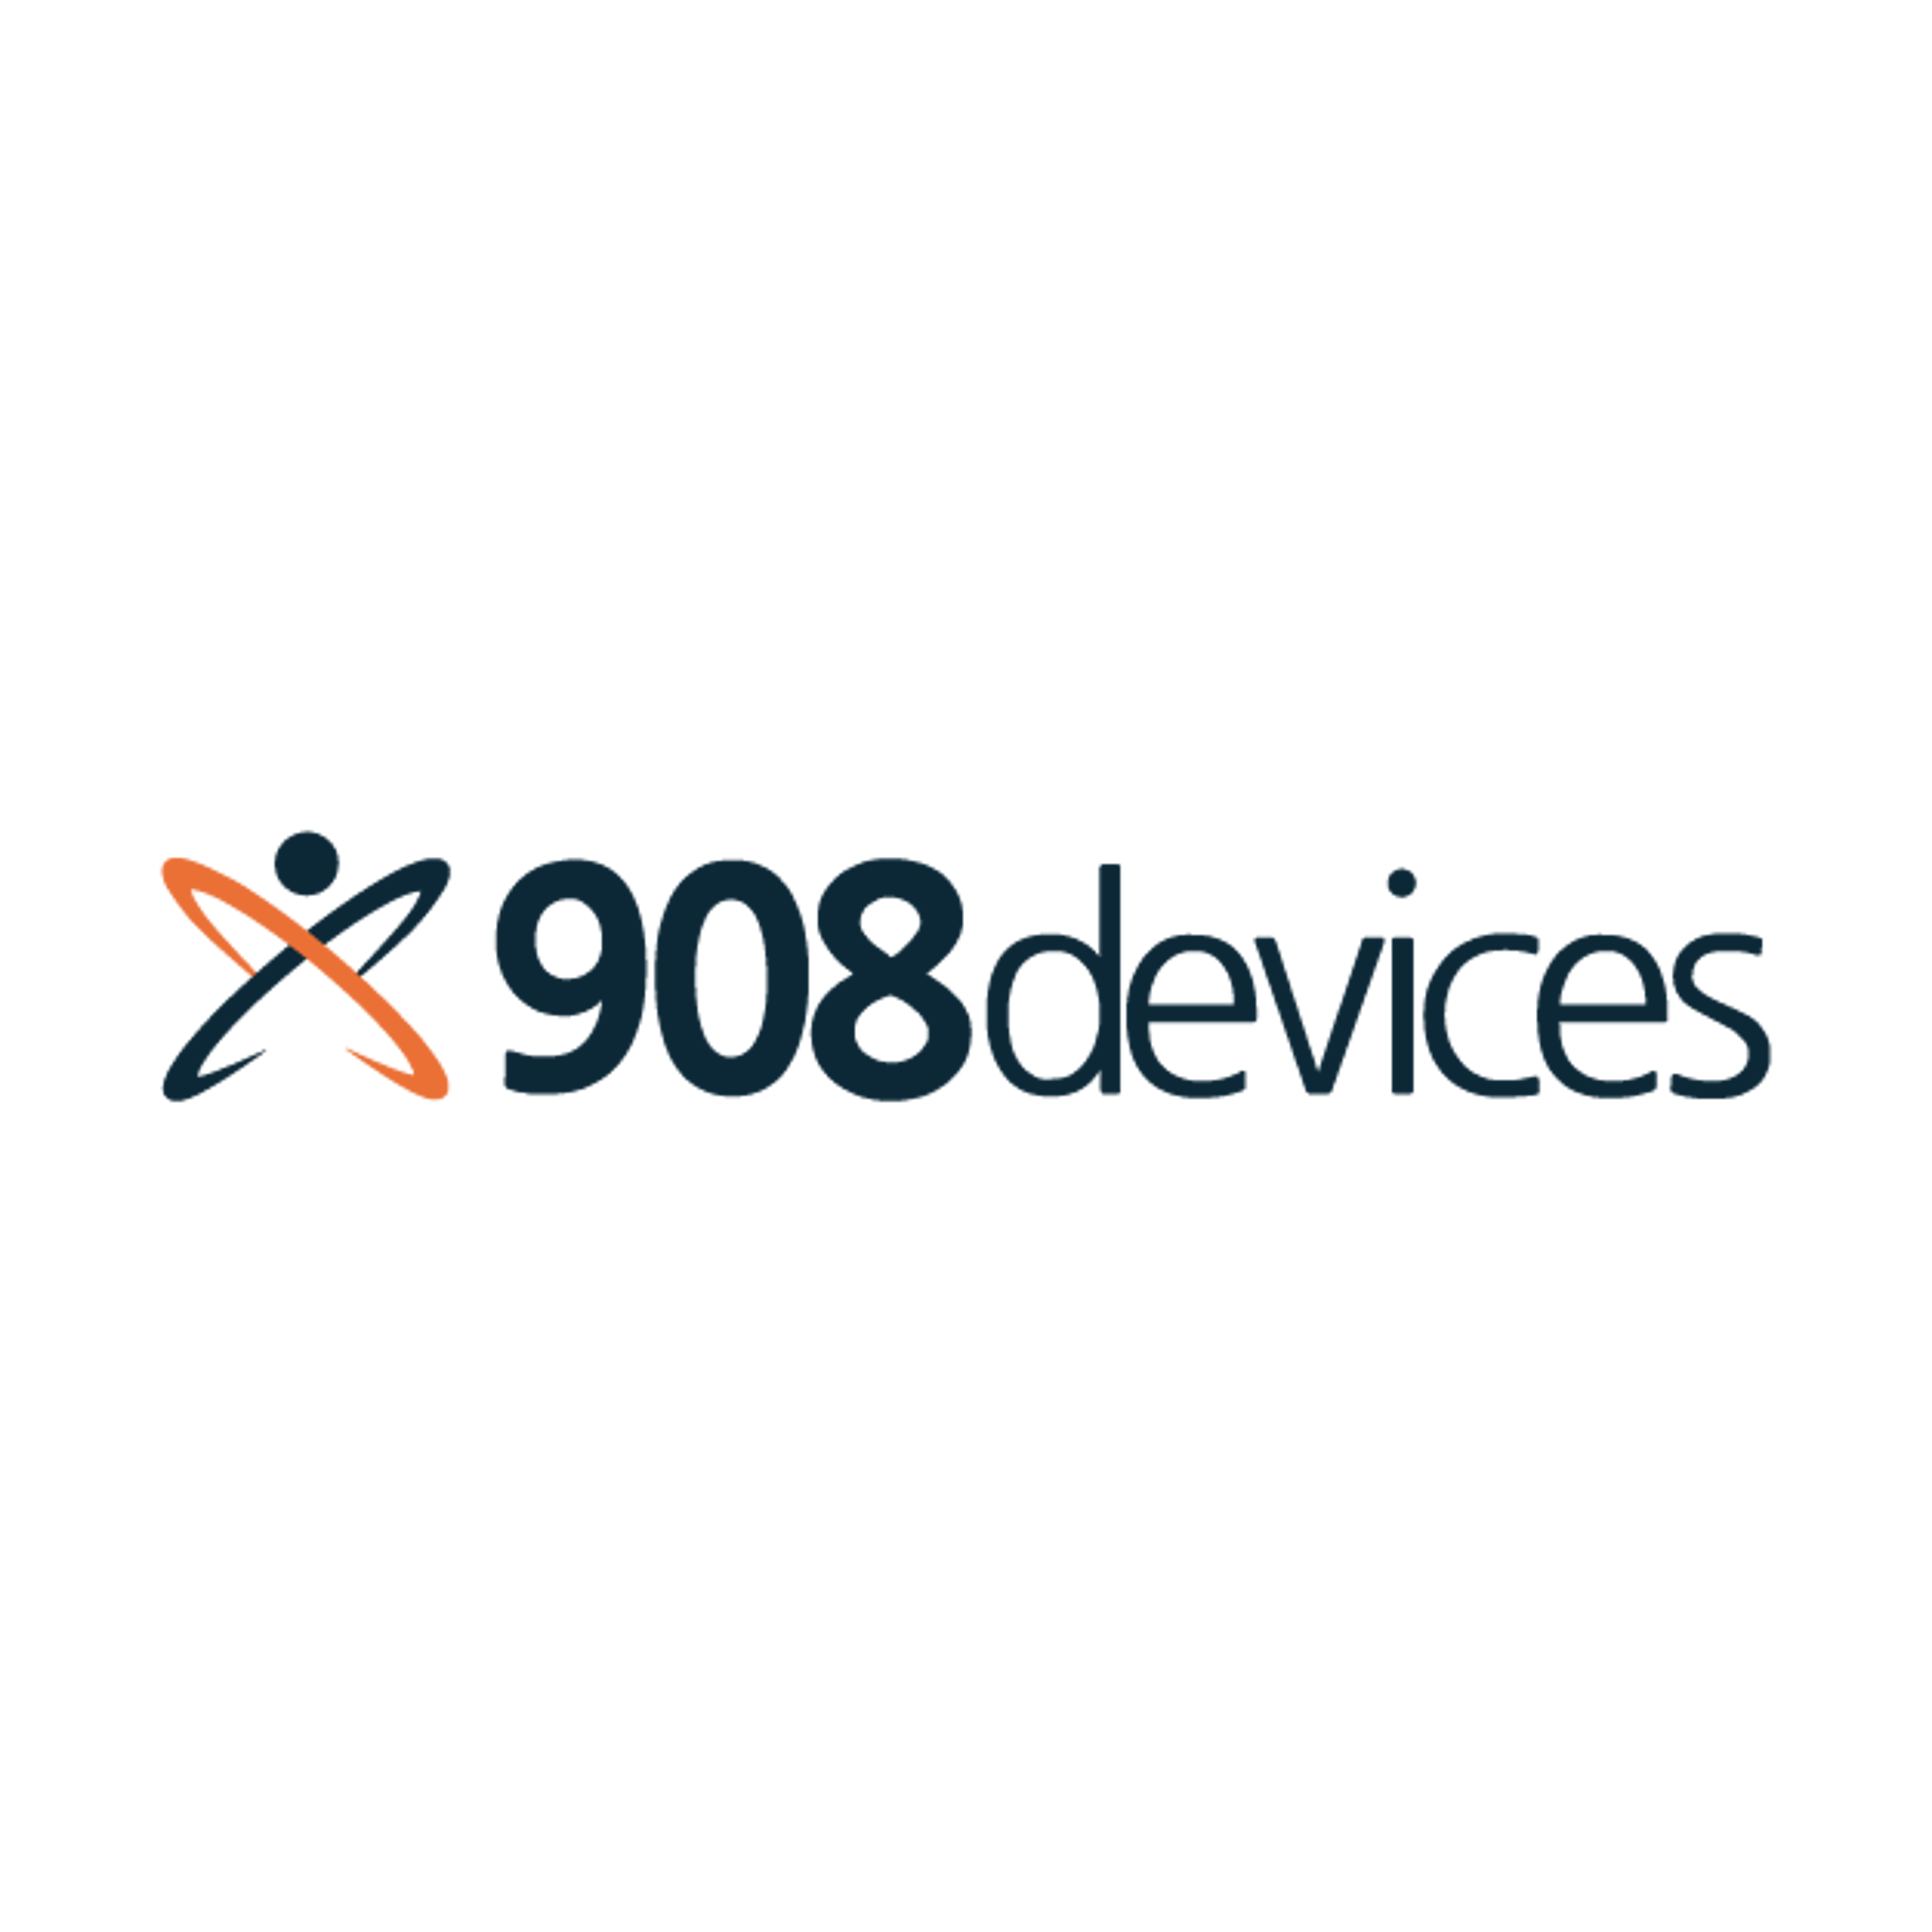 908 Devices Is Well Positioned, Analyst Says While Initiating Coverage